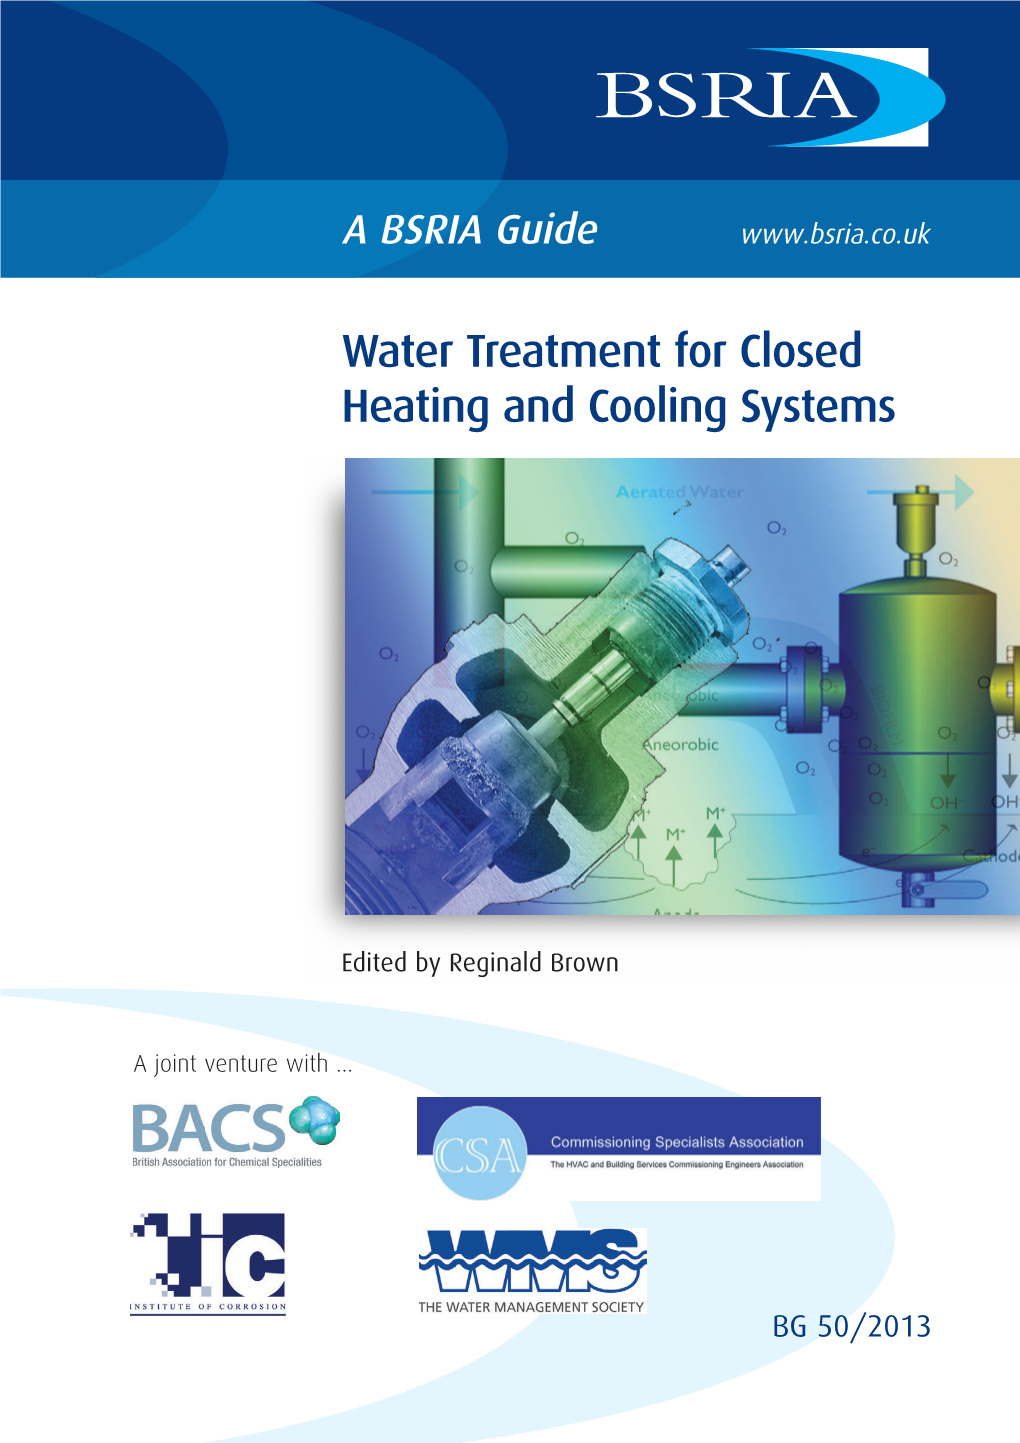 Water Treatment for Closed Heating and Cooling Systems